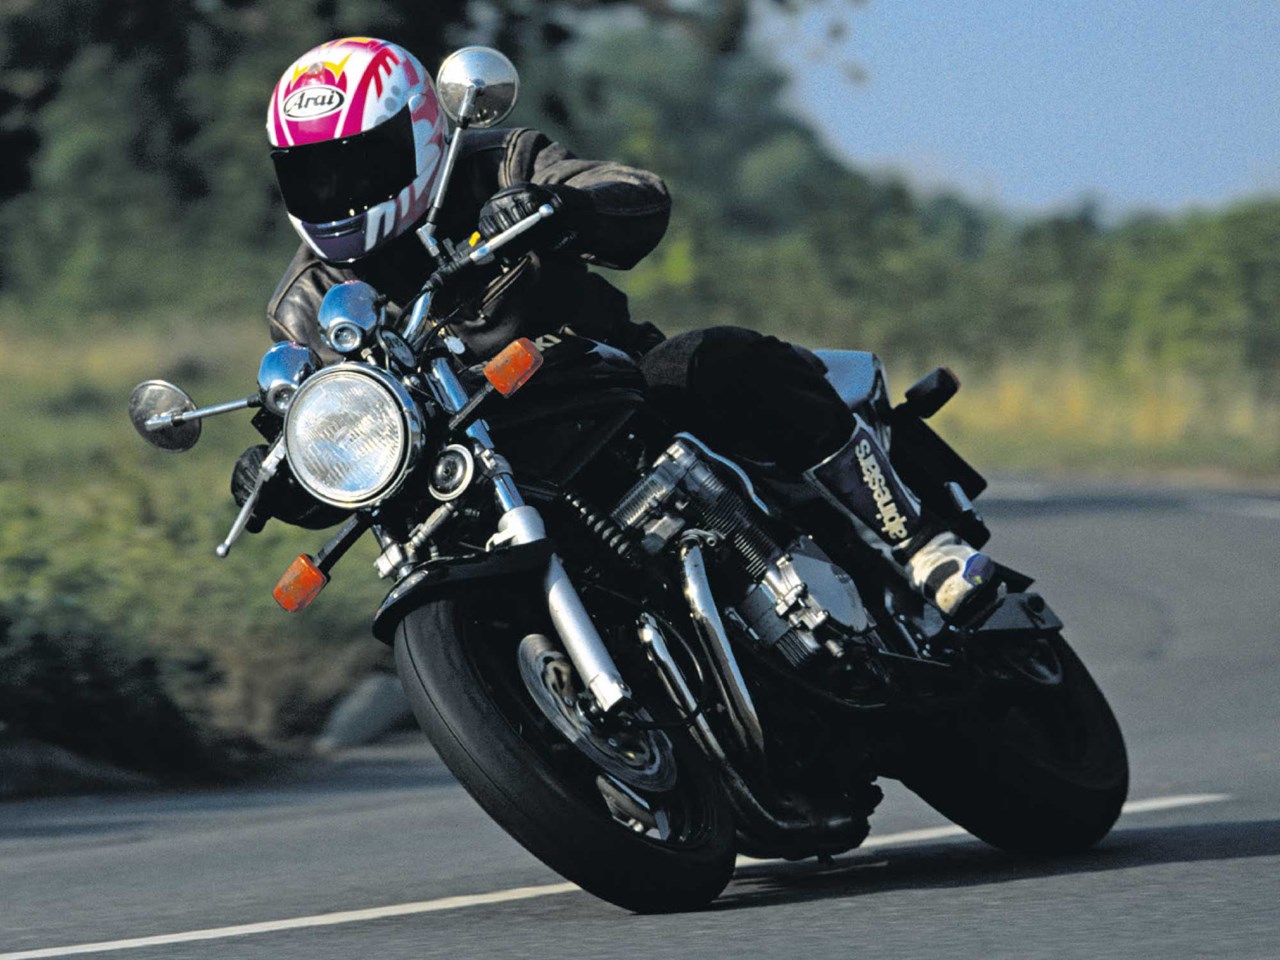 isla Reina Telégrafo Suzuki Bandit 600 (1996-2005) review and used buying guide | MCN